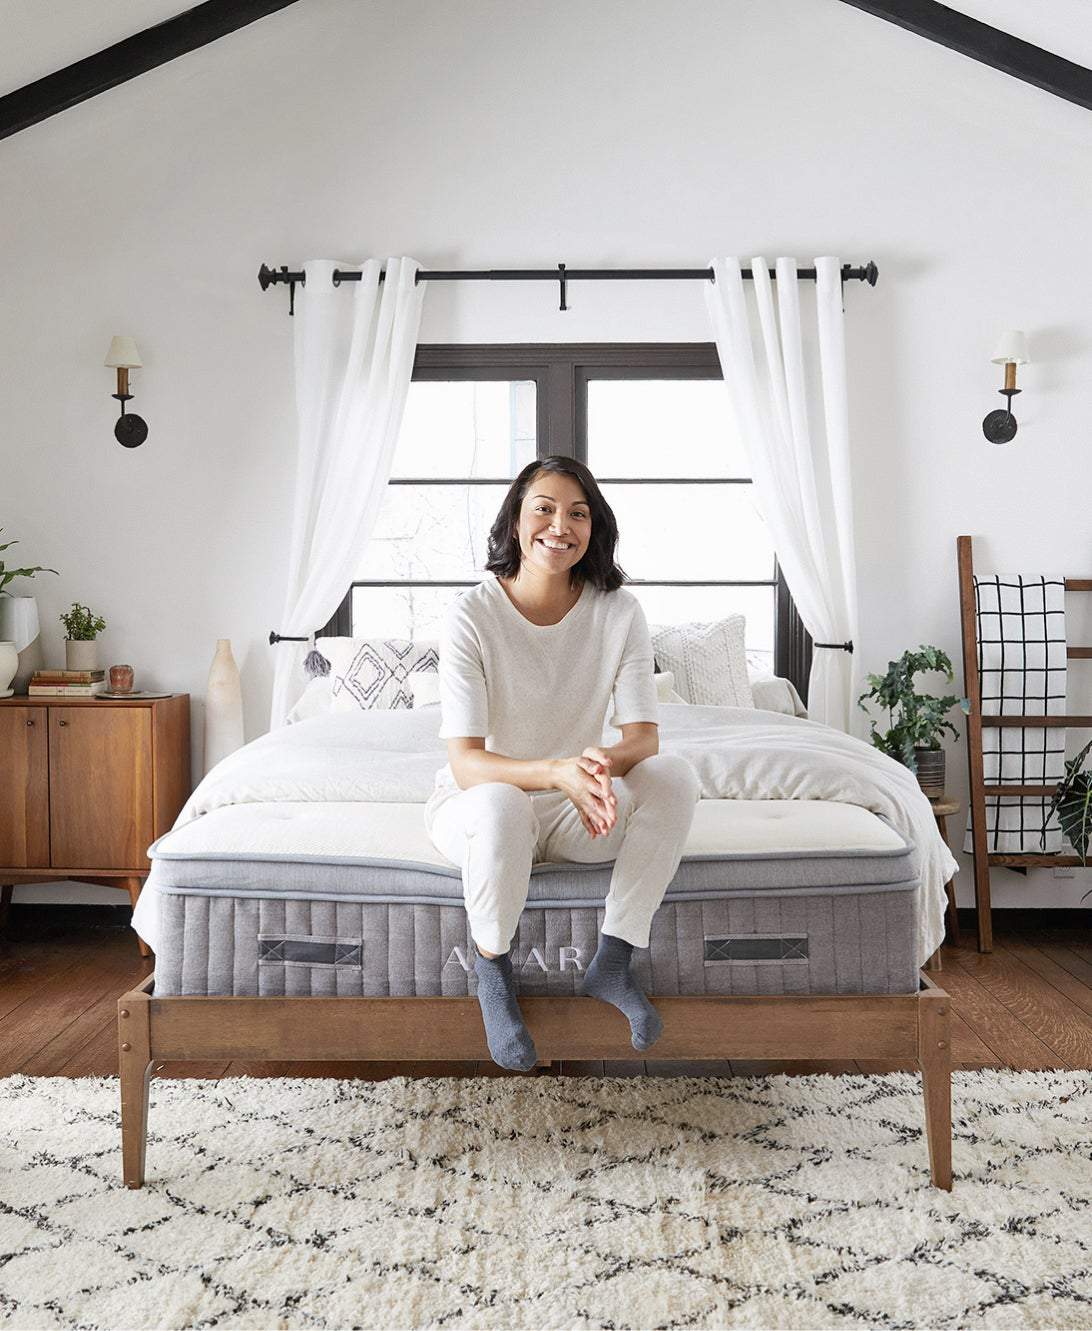 A person sits on a neatly made bed in a bright, modern bedroom with a large window, wooden furniture, and a patterned rug.